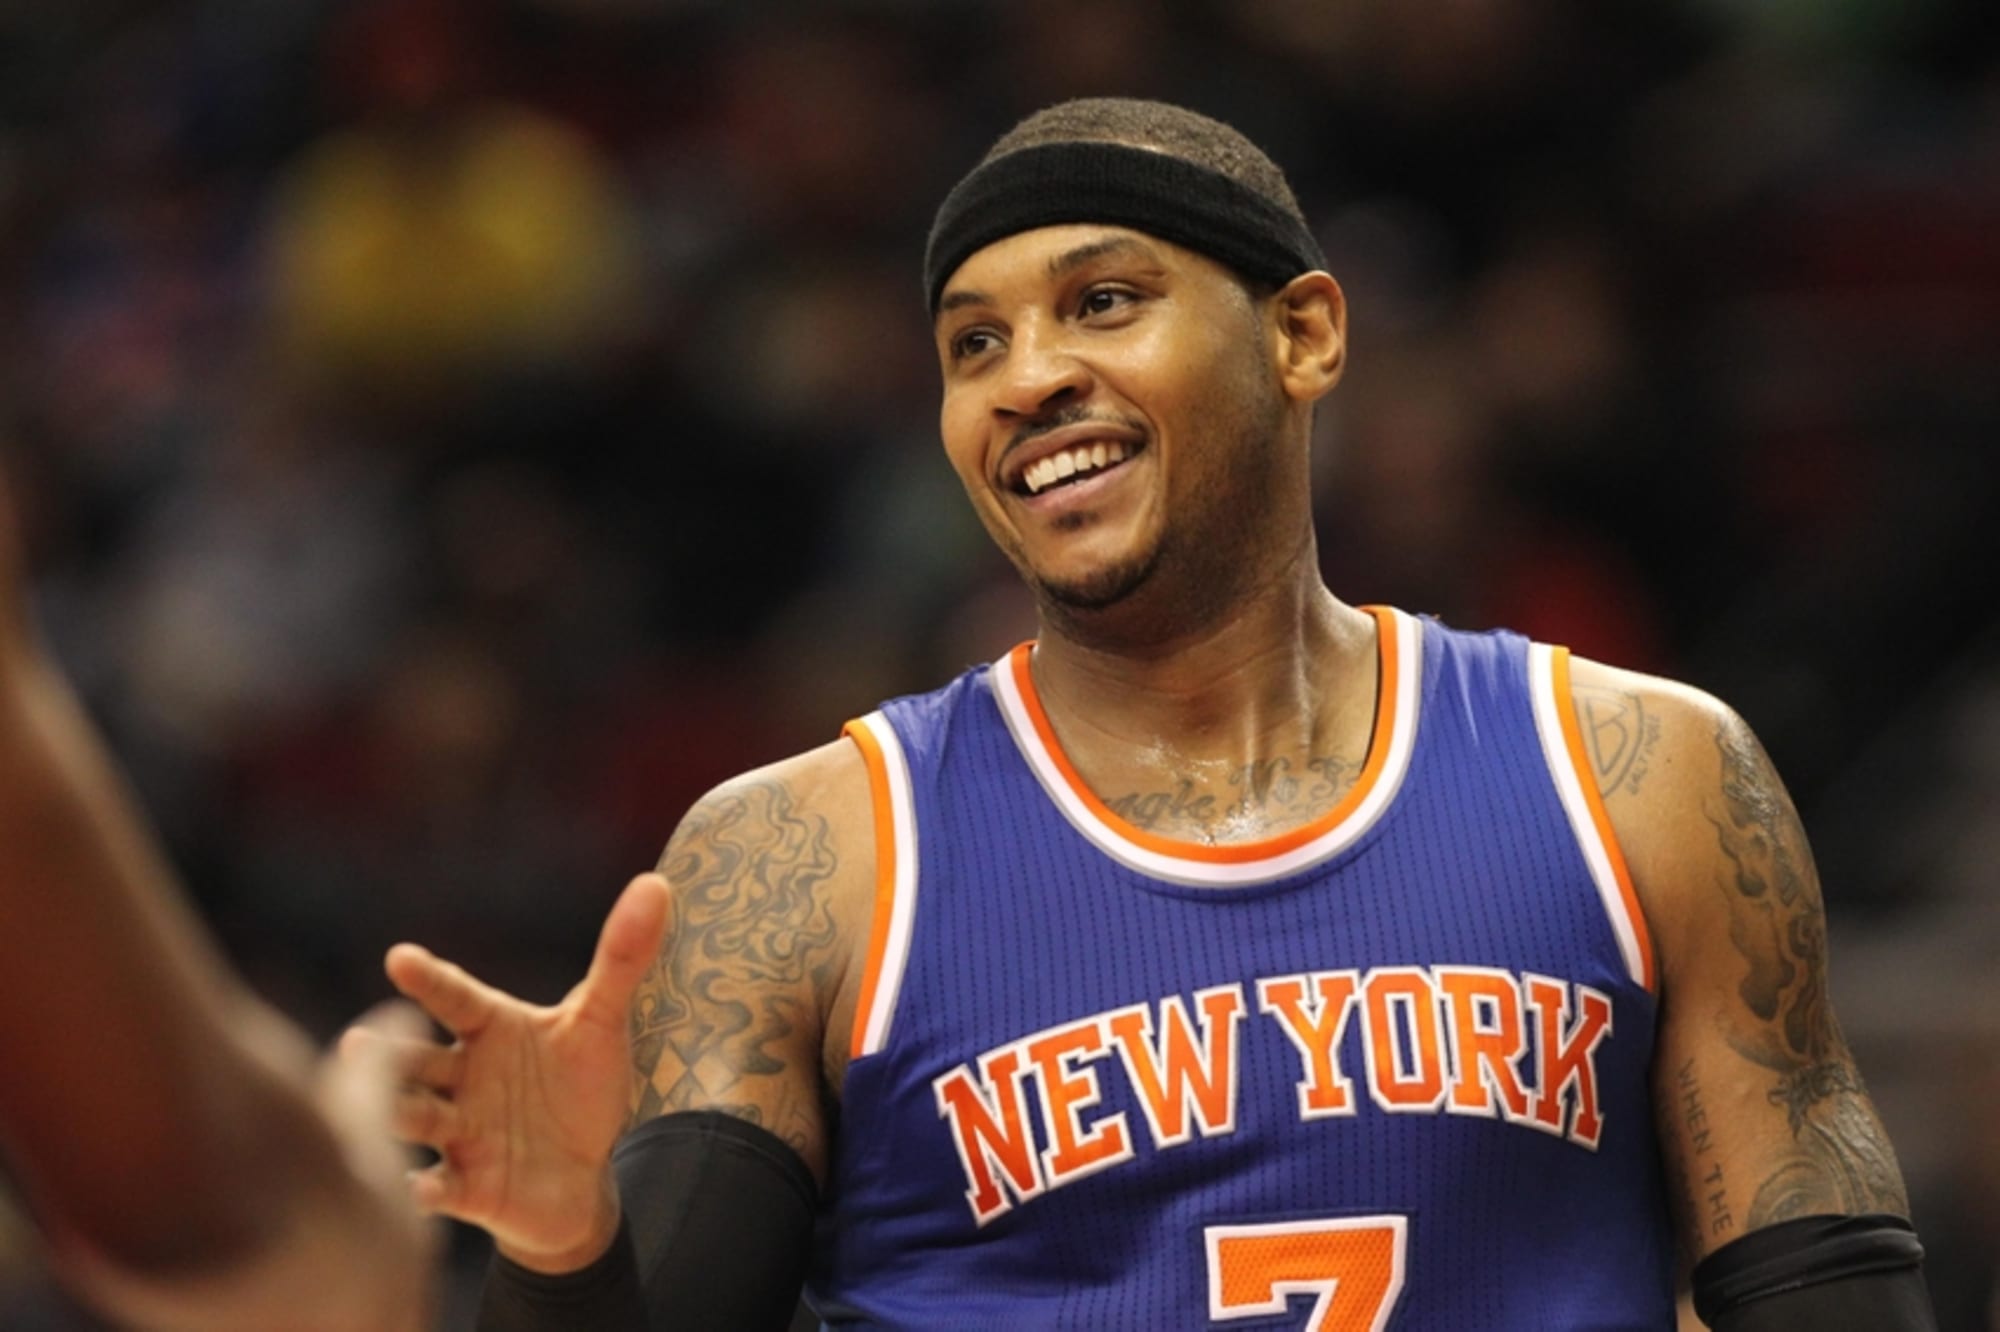 Carmelo Anthony 'I'm not going nowhere'